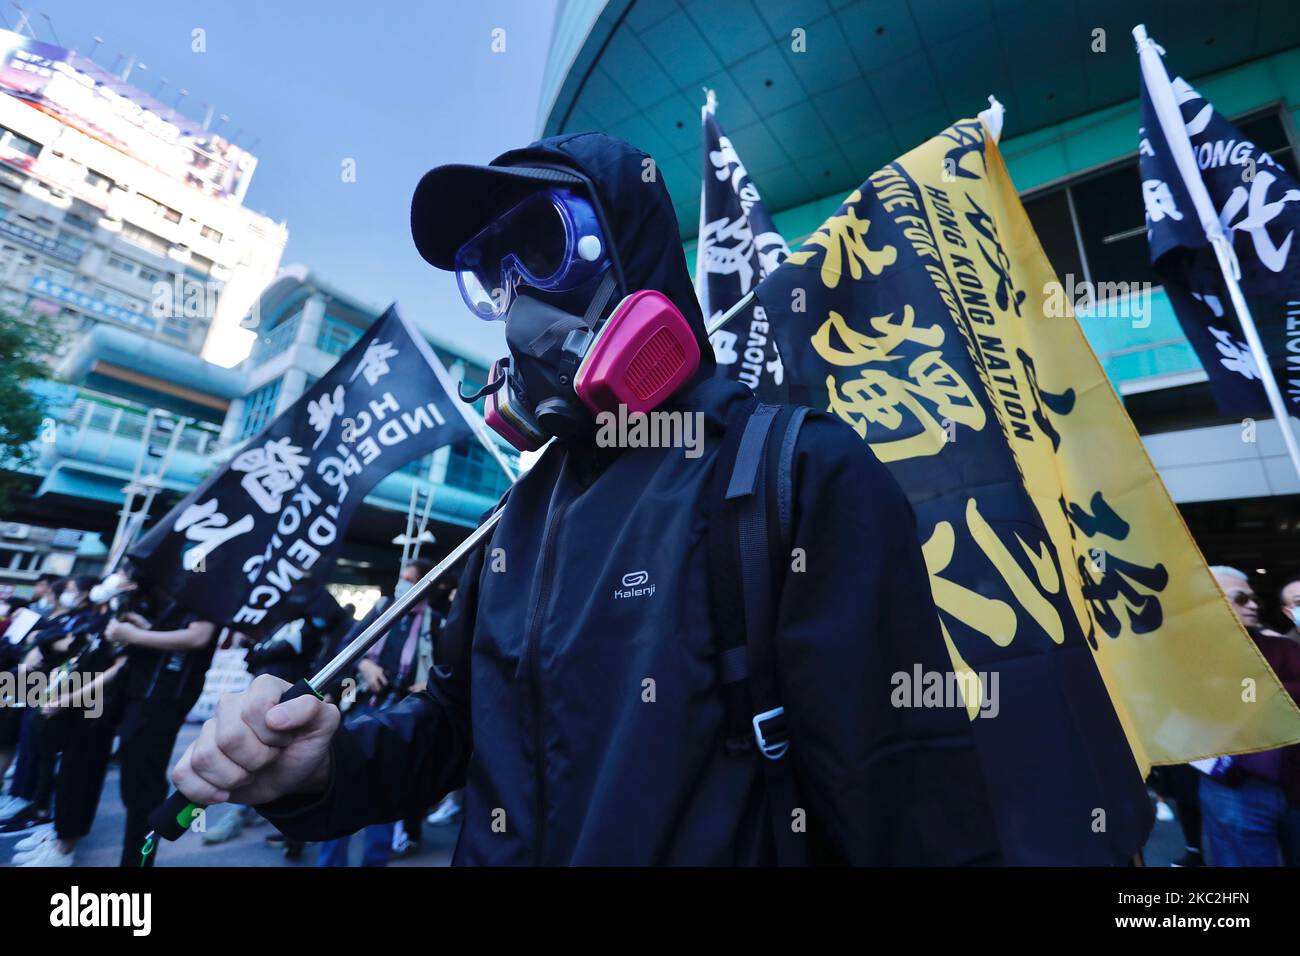 Approximately 3000 people wearing black bloc, holding signs and Hong Kong independence flags and chanting slogans demand for release of the 12 Hong Kong people who have been apprehended by Chinese law enforcement during their trip by boat to Taiwan, in Taipei City, Taiwan, on 25 October 2020. The group stepping onto China's national flags and waving the flags of former British Hong Kong also gather outside the Chinese owned Taipei Branch of ''Bank of China'' before ending the march at the Hong Kong Economic, Trade and Cultural Office in Taipei. (Photo by Ceng Shou Yi/NurPhoto) Stock Photo